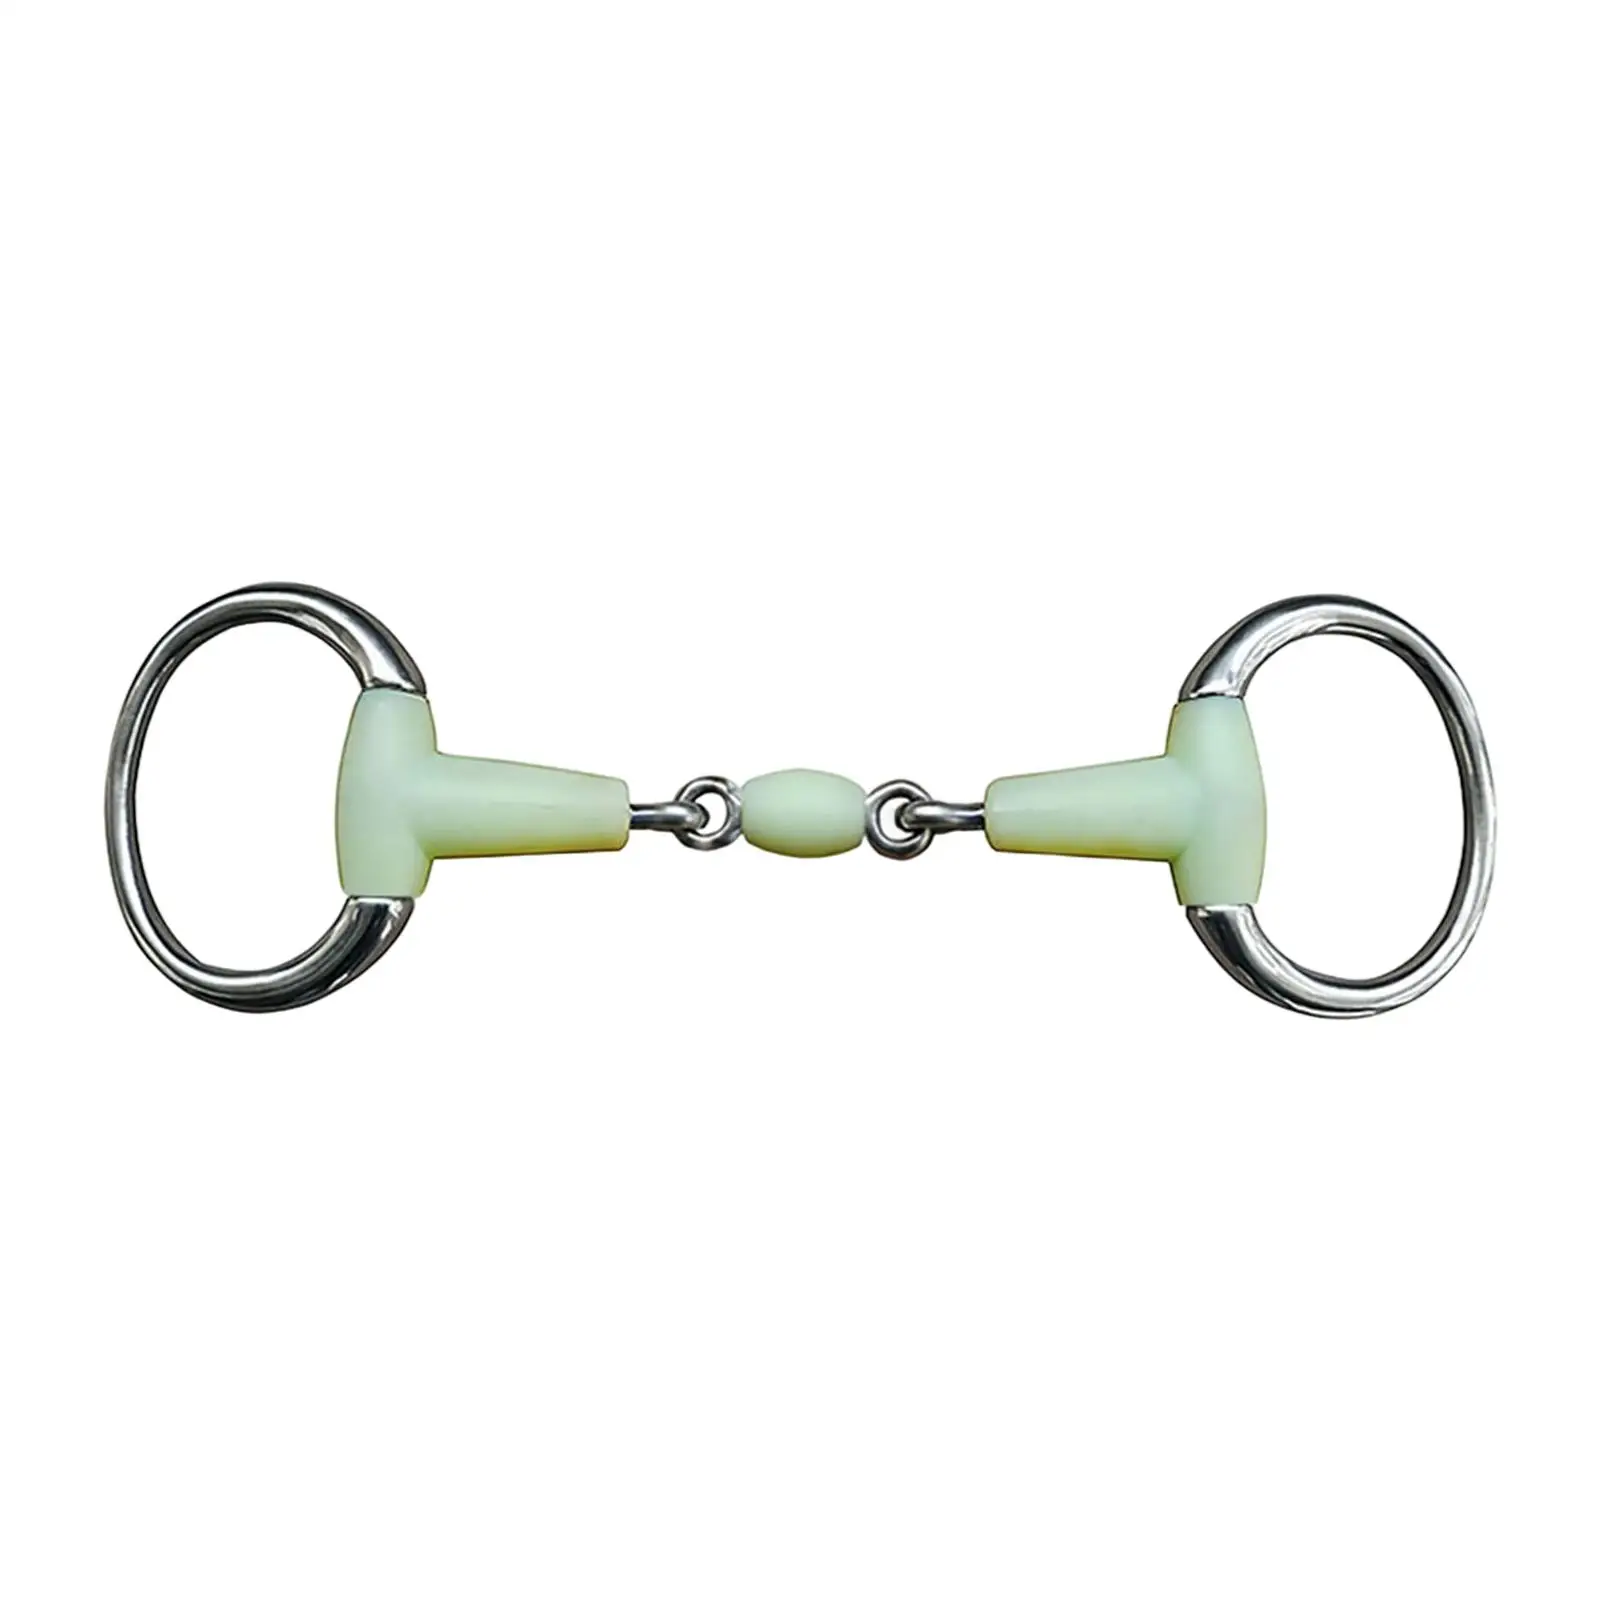 Horse Bit Mouth Wear Resistant Horse Training Snaffle Tool Stainless Steel for Horse Riding Equipment Draft Horses Mules